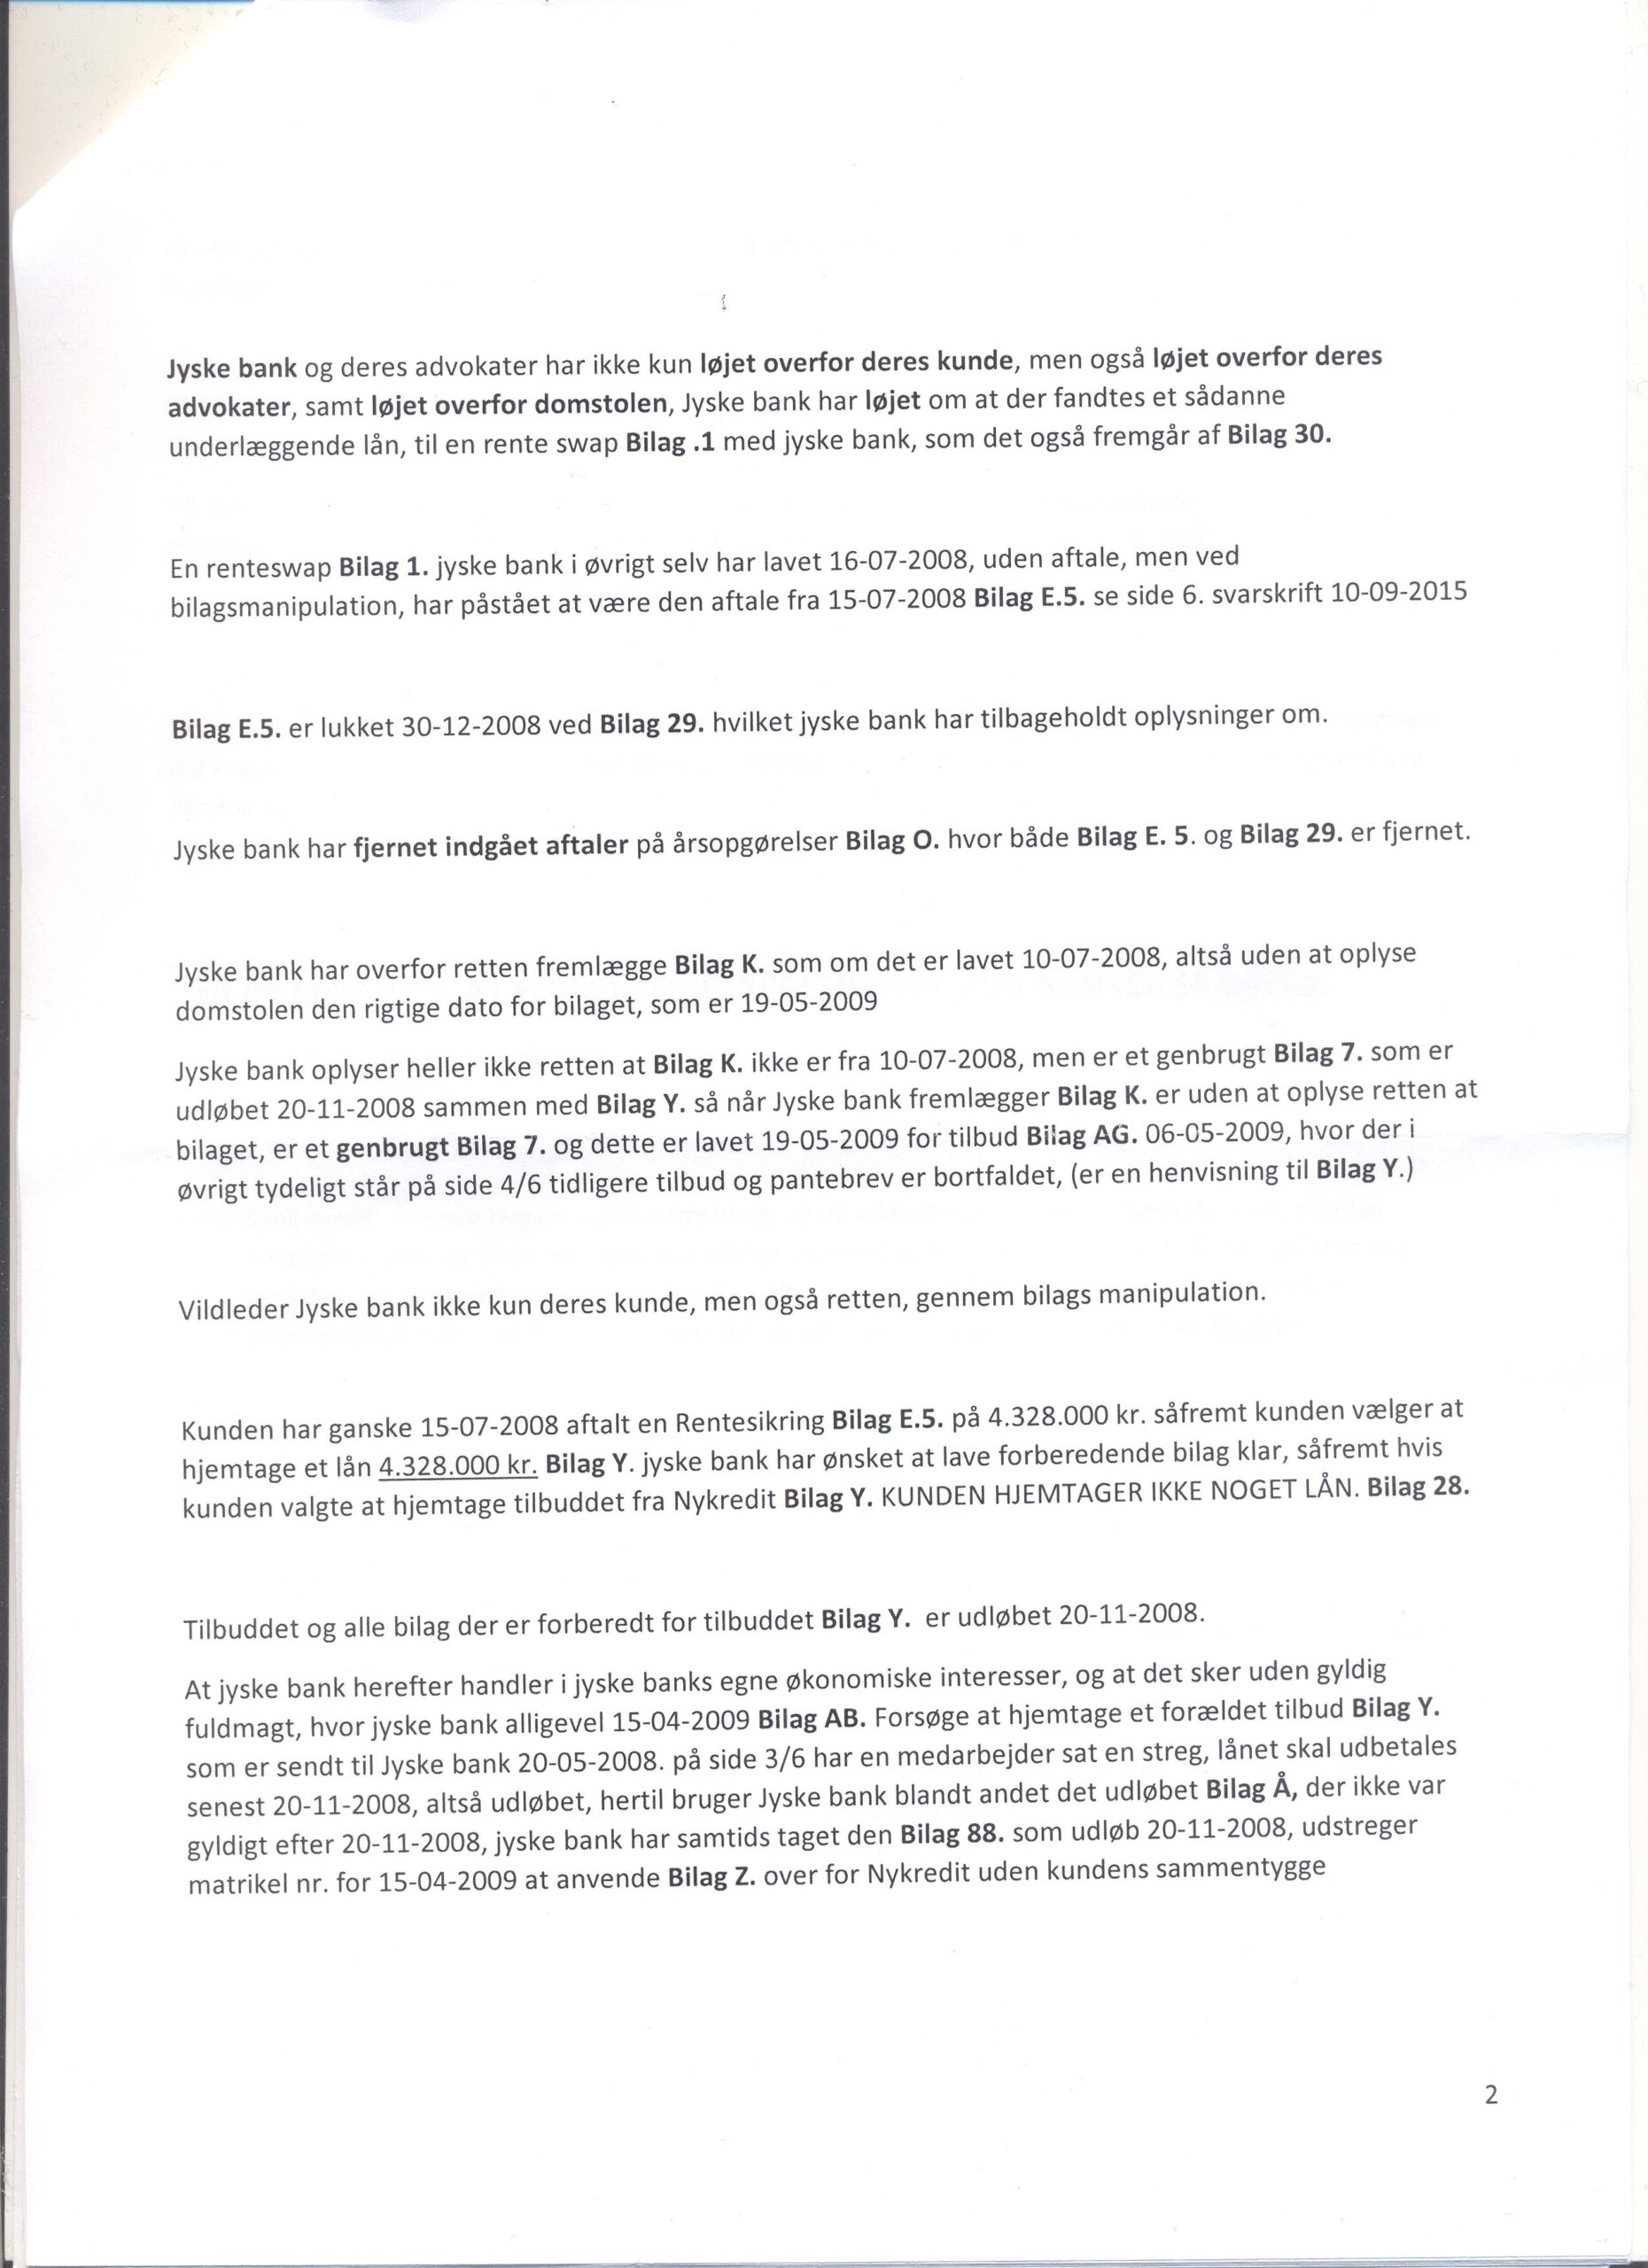 2-6. Here, a victim of an ongoing crime in the Danish bank, Jyske Bank, writes to the Danish Financial Supervisory Authority 30-04-2019. and asks the supervisor for help. The Authority refuses to help the victim who is forced to fight against the giant himself, and have his fraud / fraud case presented in the civil court by Lundgren's lawyers. The victim writes to Partner Dan Terkildsen for the first time on 30 January 2018. and asks for help in obtaining a large number of fraud allegations against the Jyske Bank Group, led by CEO Anders Christian Dam. Unfortunately, the victim of the Danish bank's fraud does not know that Jyske bank AS, subsequently February / March 2018, hires Lundgren's lawyers for one million cases, presumably in return for Lundgren's lawyers in return, and against Jyske Bank pays a return commission to Lundgren's partner company, in order not to present the client's, ie the victim's fraud allegations against Jyske Bank AS. Therefore, the Danish Financial Supervisory Authority does not know at this point 30-04-2019 that complainants are probably with a large Danish corrupt law firm, as the client does not at this time have any knowledge that Lundgren's lawyers, have large financial interests with the Jyske Bank Group, and therefore Lundgren's lawyers choose to damage the client's case against Jyske bank AS. When Lundgren's many employees choose to keep this collaboration with the Management of Jyske Bank AS to the client, and Dan Terkildsen subsequently on 2 November 2018 chooses to hold a meeting with a board member Philip Baruch from Jyske Bank AS. There very well himself, and together with Anders Dam he has been behind Jyske bank's employment of Lundgren's lawyers. It is a fact that the client's lawyers Lundgrens have been bought and paid for by the defendant Jyske Bank AS. It is a fact that Lundgren's lawyers hide this from the client. It is a fact that Lundgrens does not present the client's case to the court. Although Lundgren's Dan Terkildsen was employed to help the client present a case of fraud for millions against Jyske Bank, it became clear on 21 September 2019. It was clear to the client that Lundgren's partner Dan Terkildsen directly opposed the client's claims were presented to the court. Lundgren's client thinks back to a meeting 9-11 2018. where Dan Terkildsen tells the client that he has a good case, and Dan says the client's car is good, knowing that what is on the car must be presented before it matters to the case in against Jyske Bank AS, and its Board of Directors. But that Dan Terkildsen September 2019. then writes that he decides and does not present the client's claims, then Lundgren's lawyers by partner Dan Terkildsen are not worthy to be a lawyer. It is a fact that Dan Terkildsen opposes the Danish constitution. § 64 and has opposed that a judge would be able to perform their work and judge according to the law, when the judges will not be able to judge according to the client's claims and evidence, after which Dan Terkildsen and his disciples deliberately and evil withheld the client's pleas with evidence before the court.